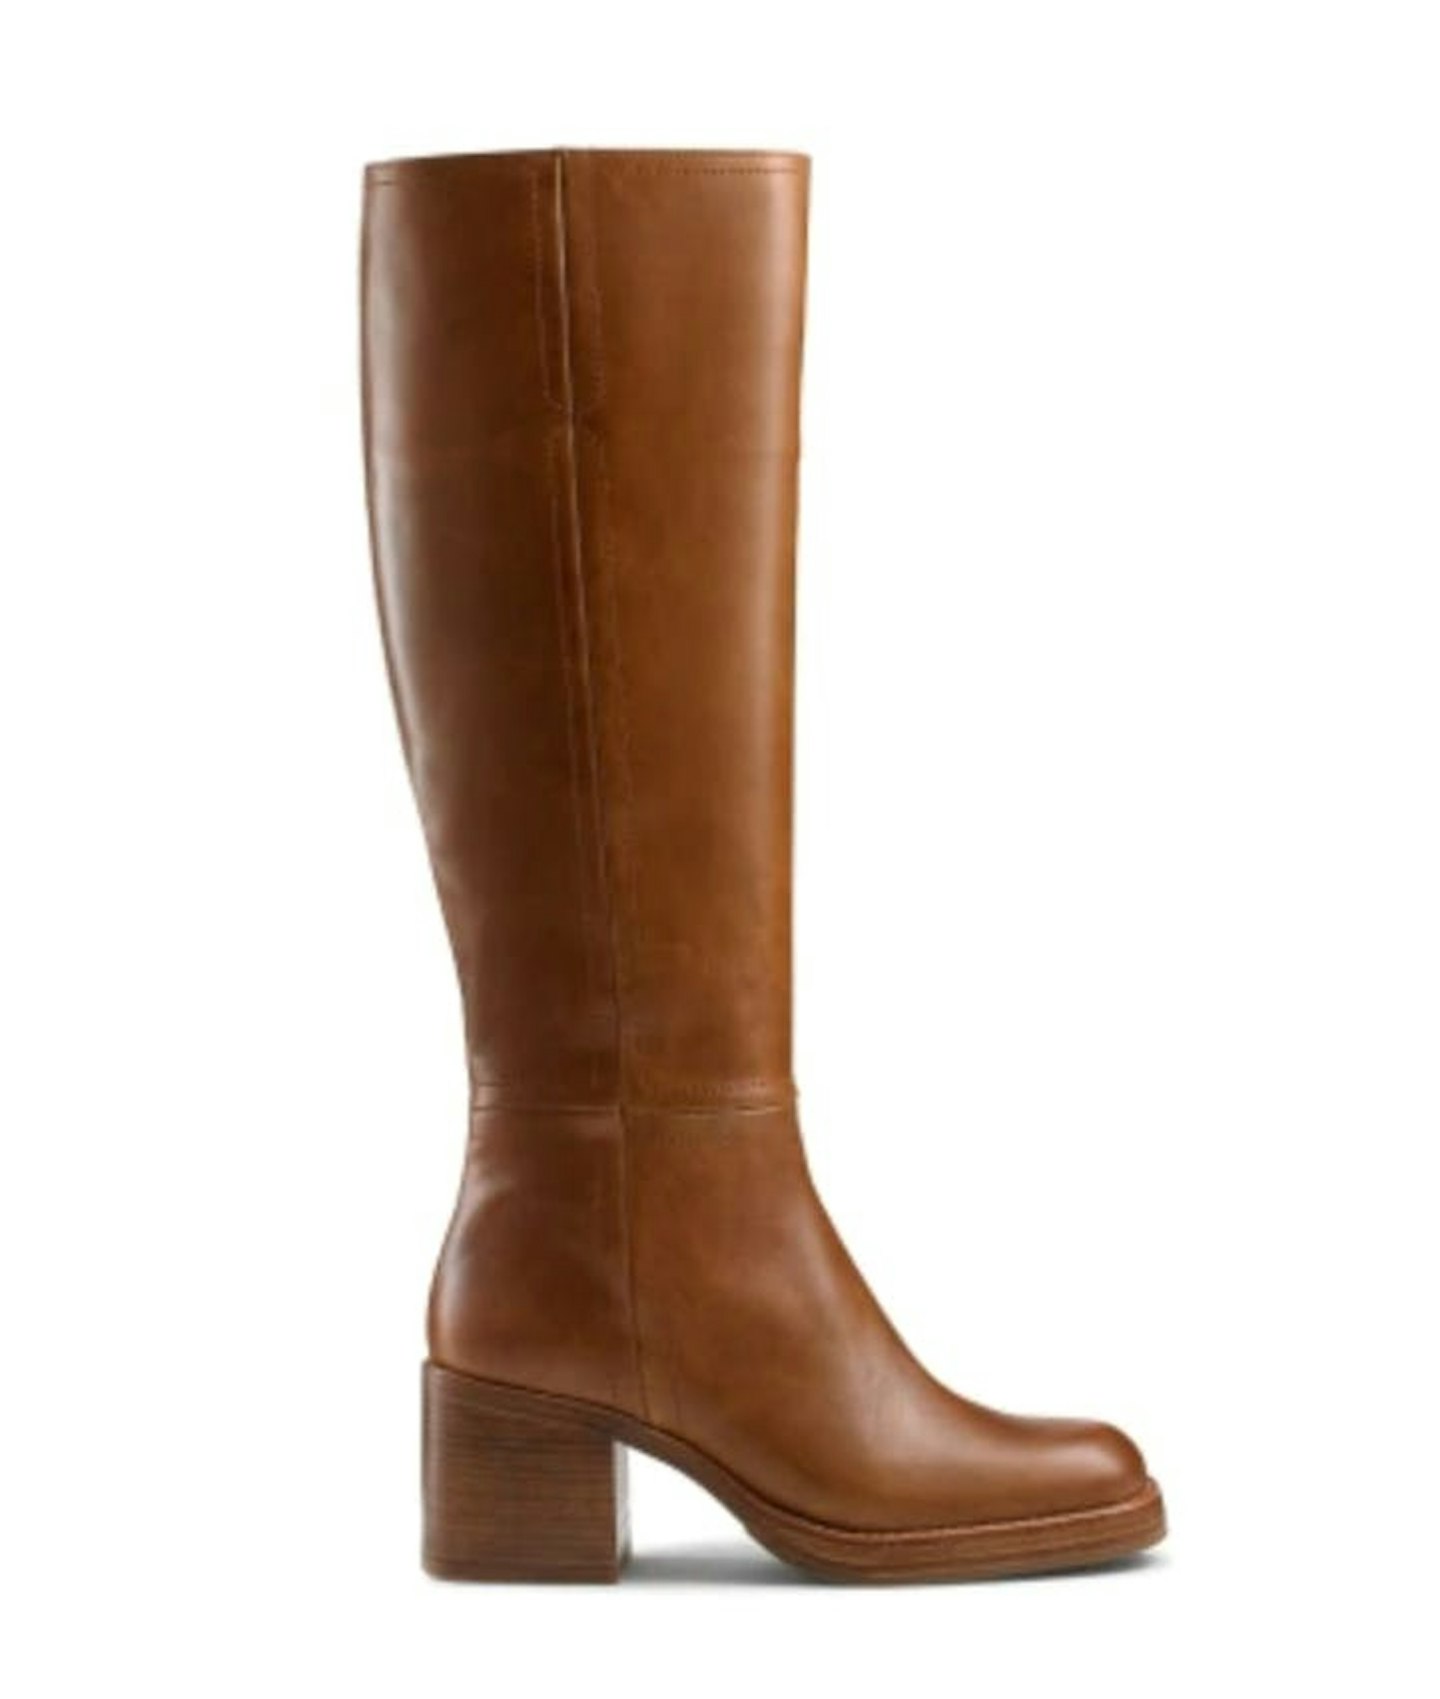 Russell And Bromley Gaucho Knee-High Block-Heel Boots